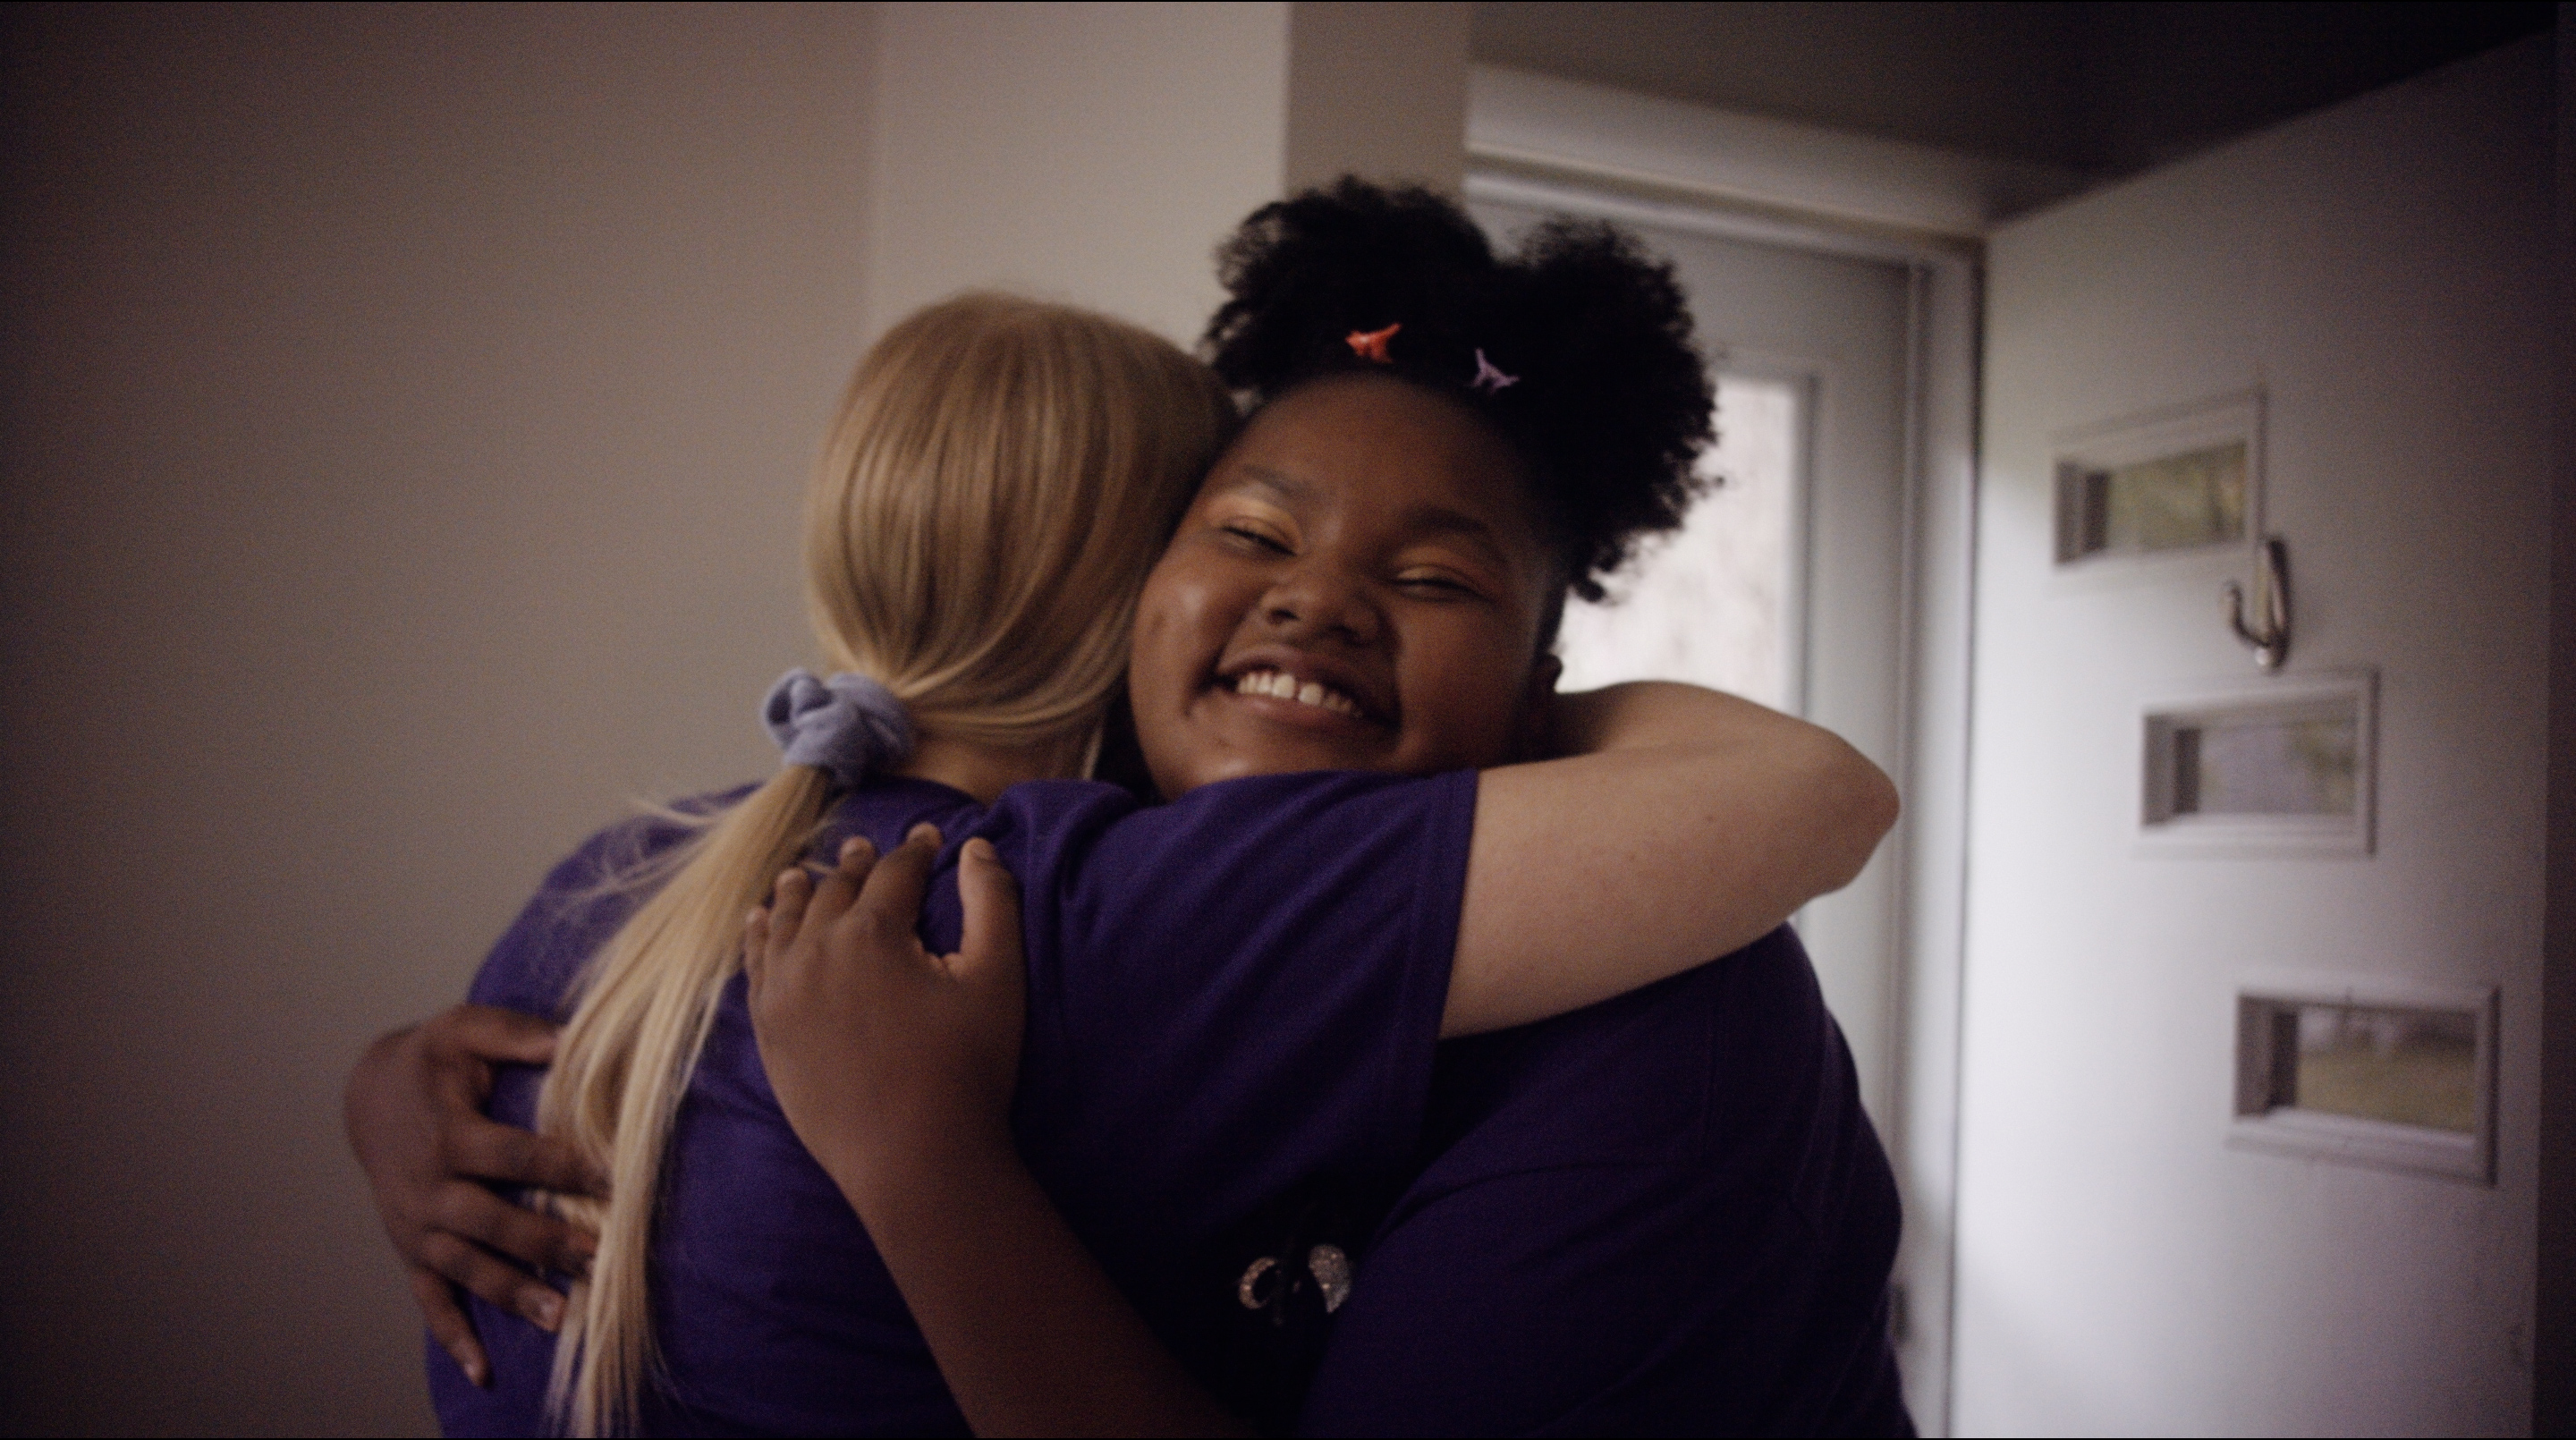 Clare and Jaliyah hugging.